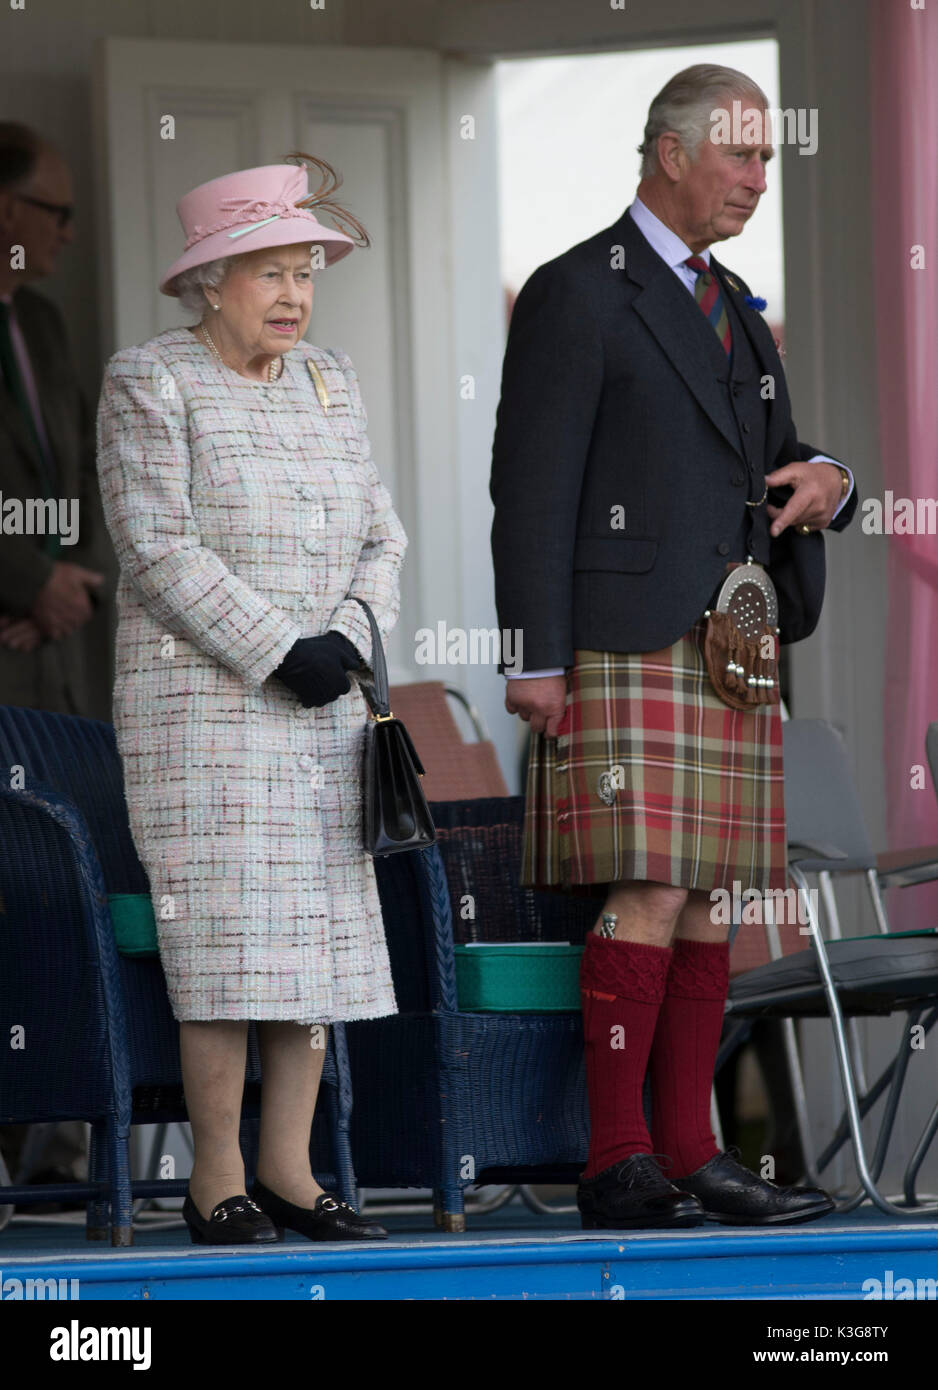 London, UK. 3rd Sep, 2017. British Queen Elizabeth II attends the 2017 Braemar Gathering, an annual traditional Scottish Highland Games, in Braemar, Scotland, Sept. 2, 2017. Credit: Xinhua/Alamy Live News Stock Photo